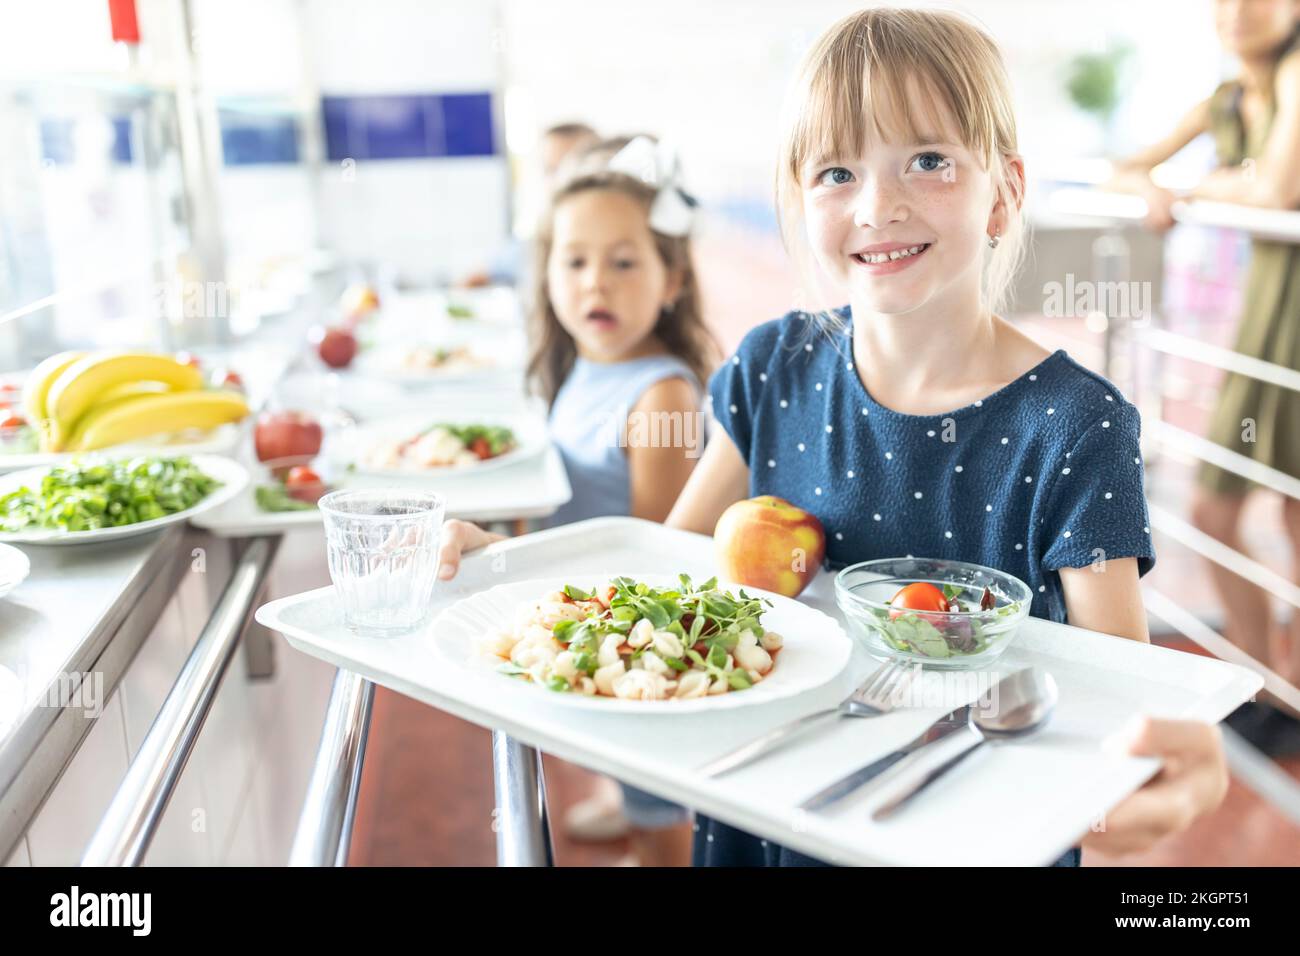 Smiling girl holding tray at lunch break in school cafeteria Stock Photo